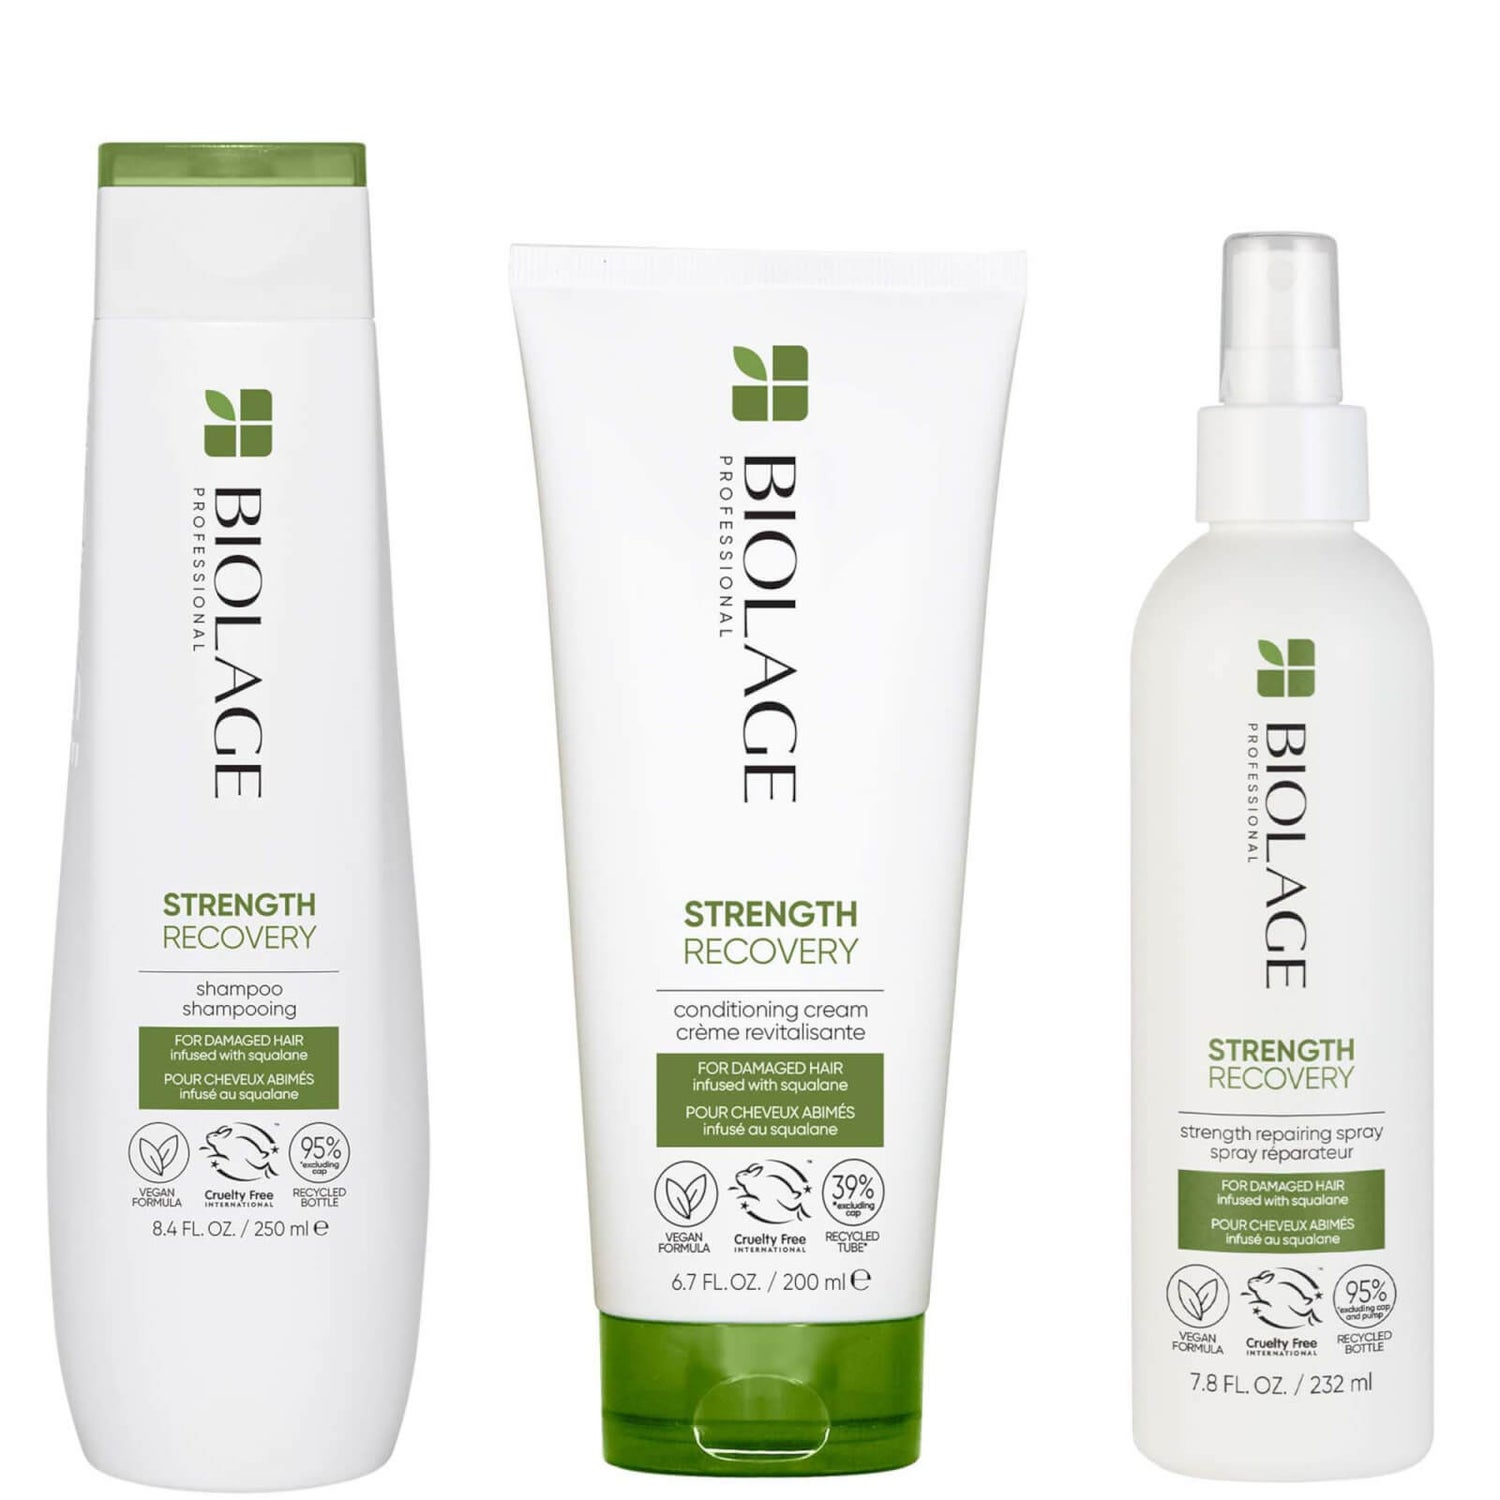 Biolage Professional Strength Recovery Vegan Cleansing Shampoo, Conditioner and Leave-in Spray Routine for Damaged Hair